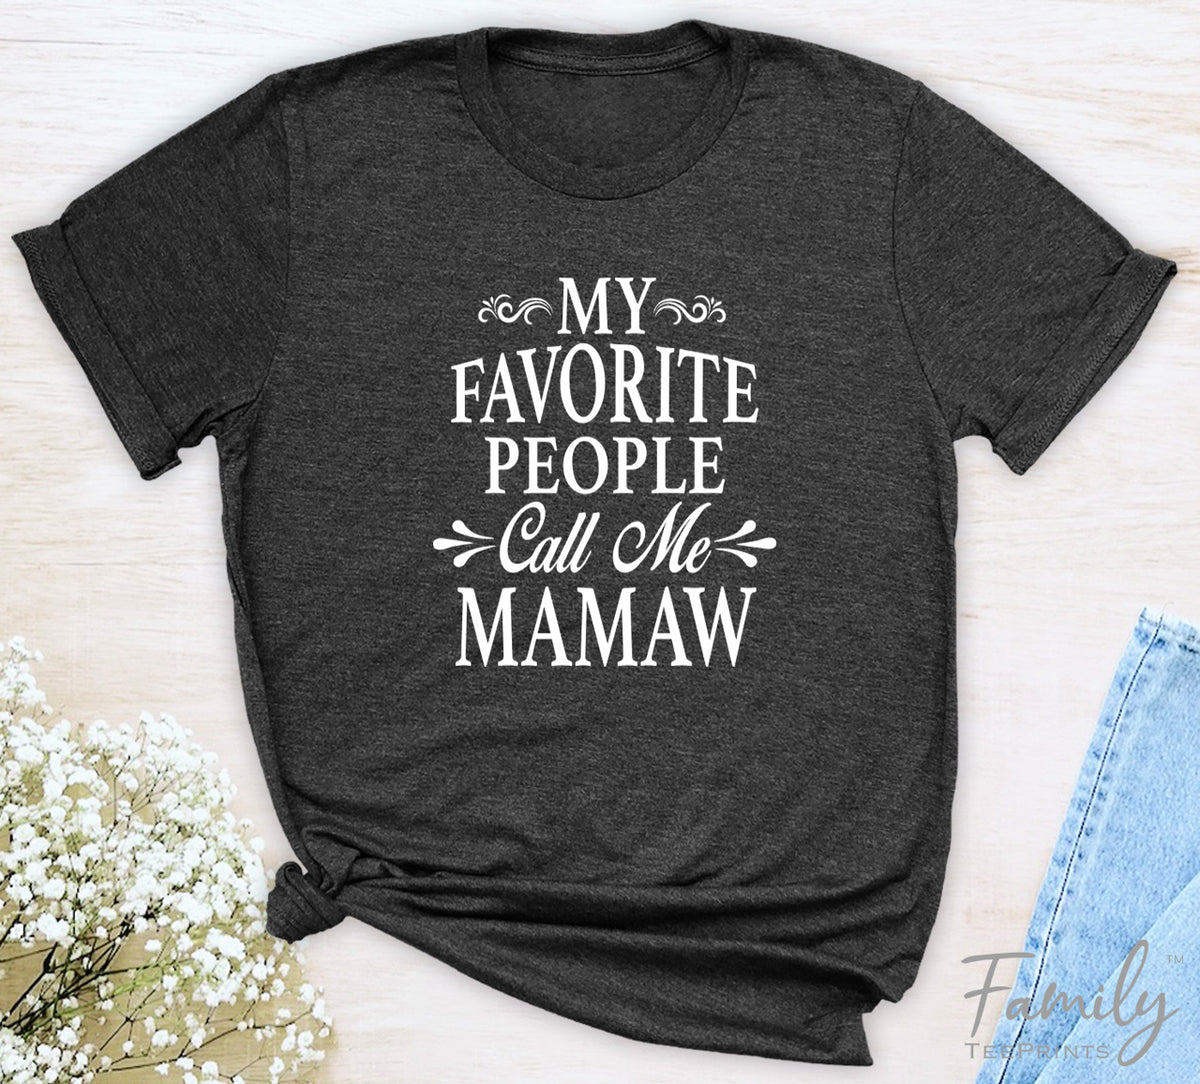 My Favorite People Call Me Mamaw - Unisex T-shirt - Mamaw Shirt - Gift For Mamaw